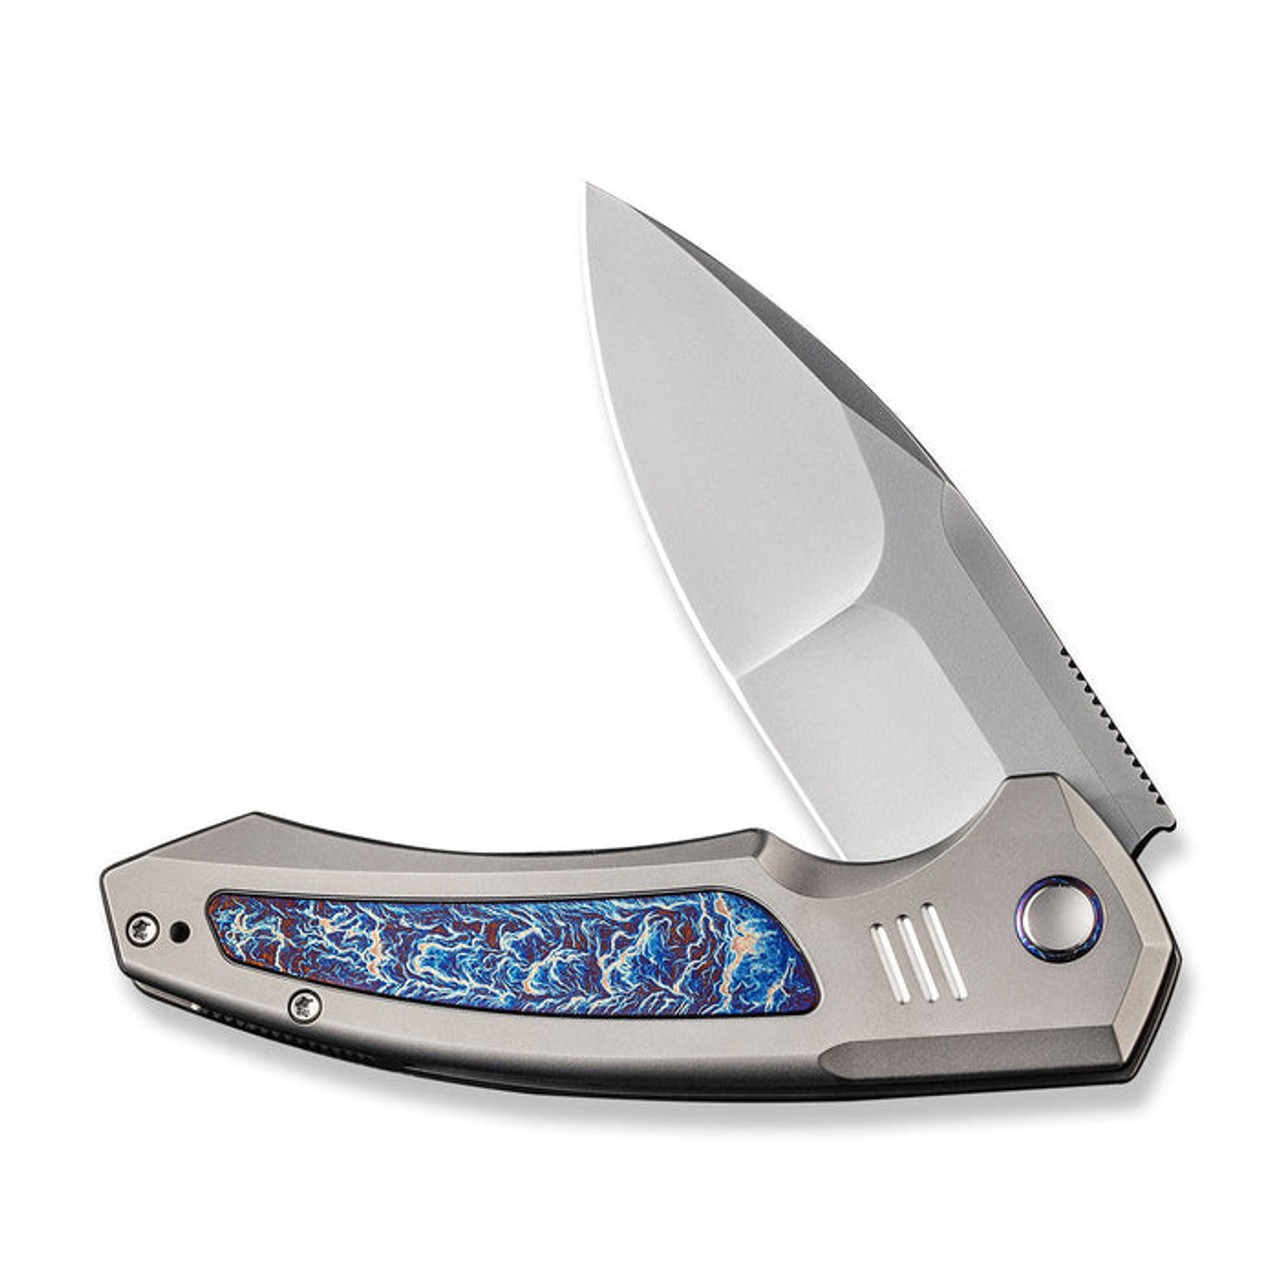 WE Knife Hyperactive (WE230301) 3.8" Vanax Polished Bead Blasted Drop Point Plain Blade, Polished Bead Blasted Titanium Handle with Blue Flamed Carbon Fiber Inlay